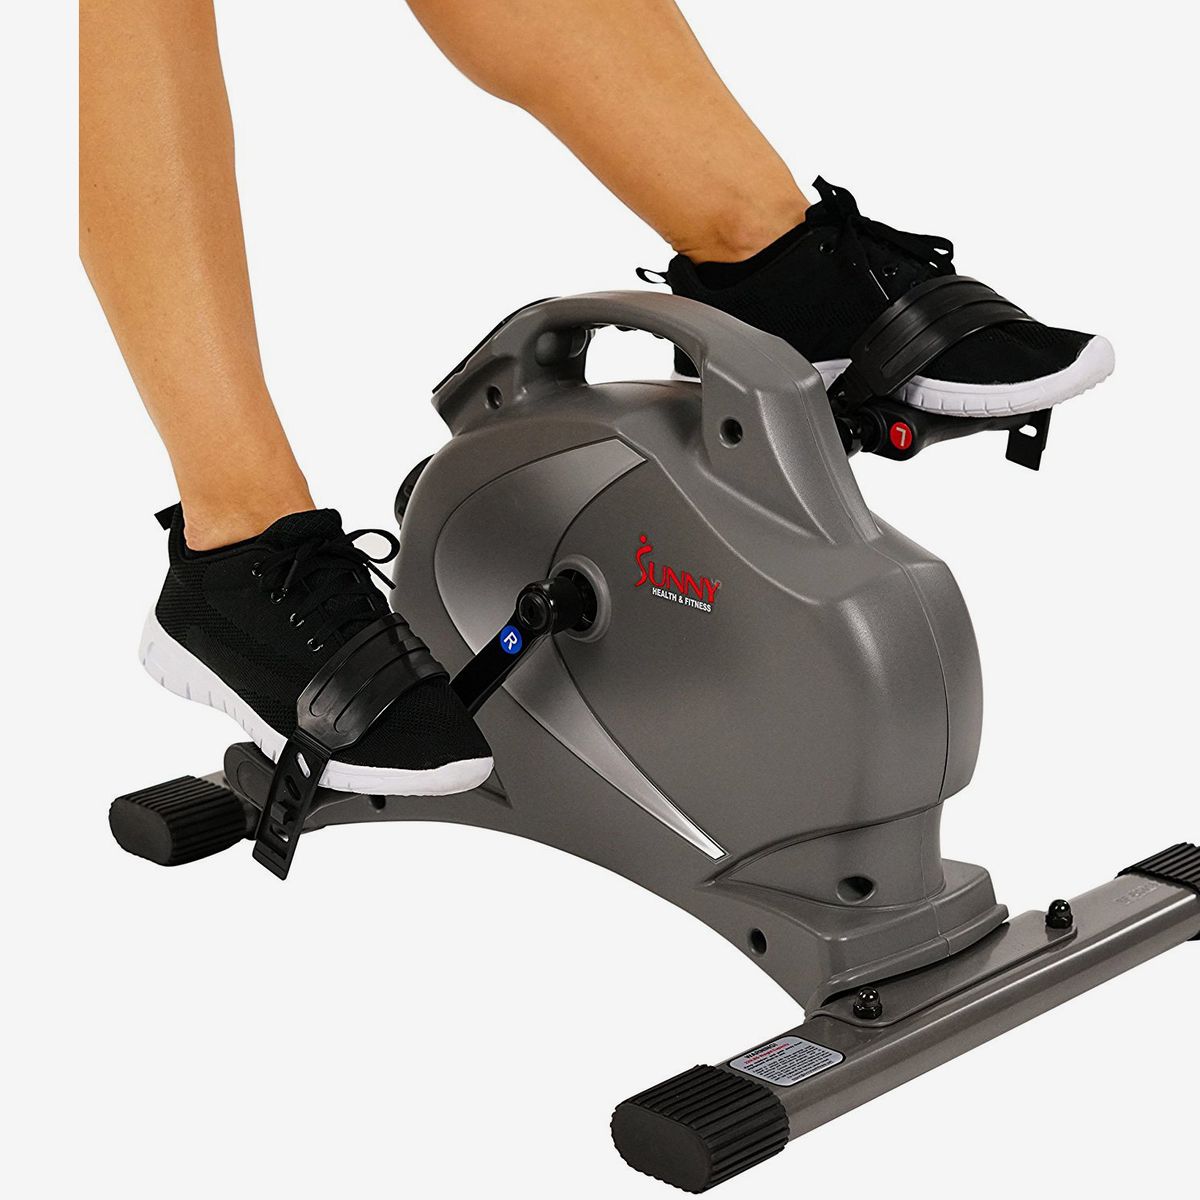 exercise bike from chair